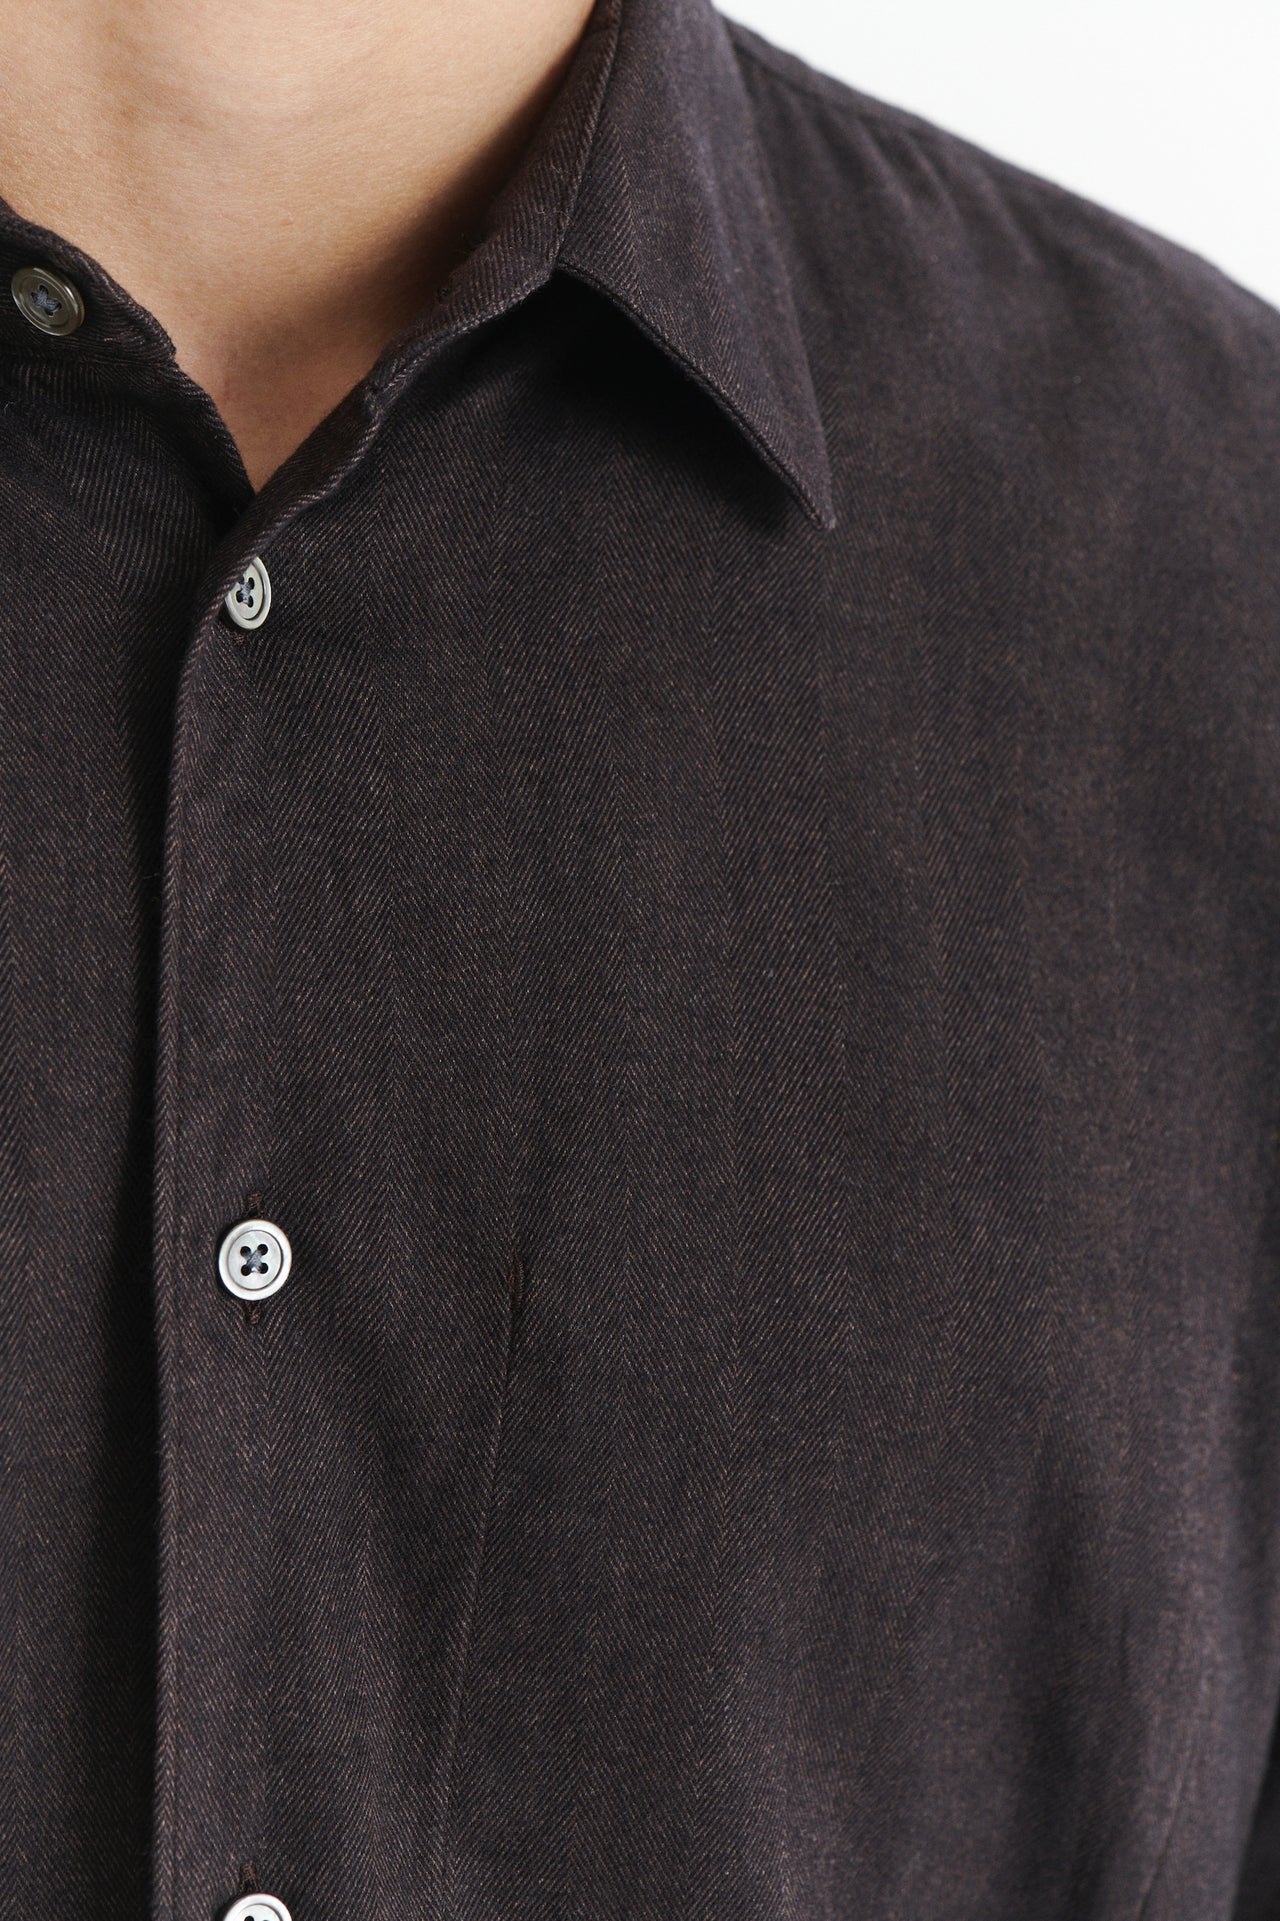 Feel Good Shirt in a Brown Soft and Silky Italian Lyocell and Cotton Flannel by Albini